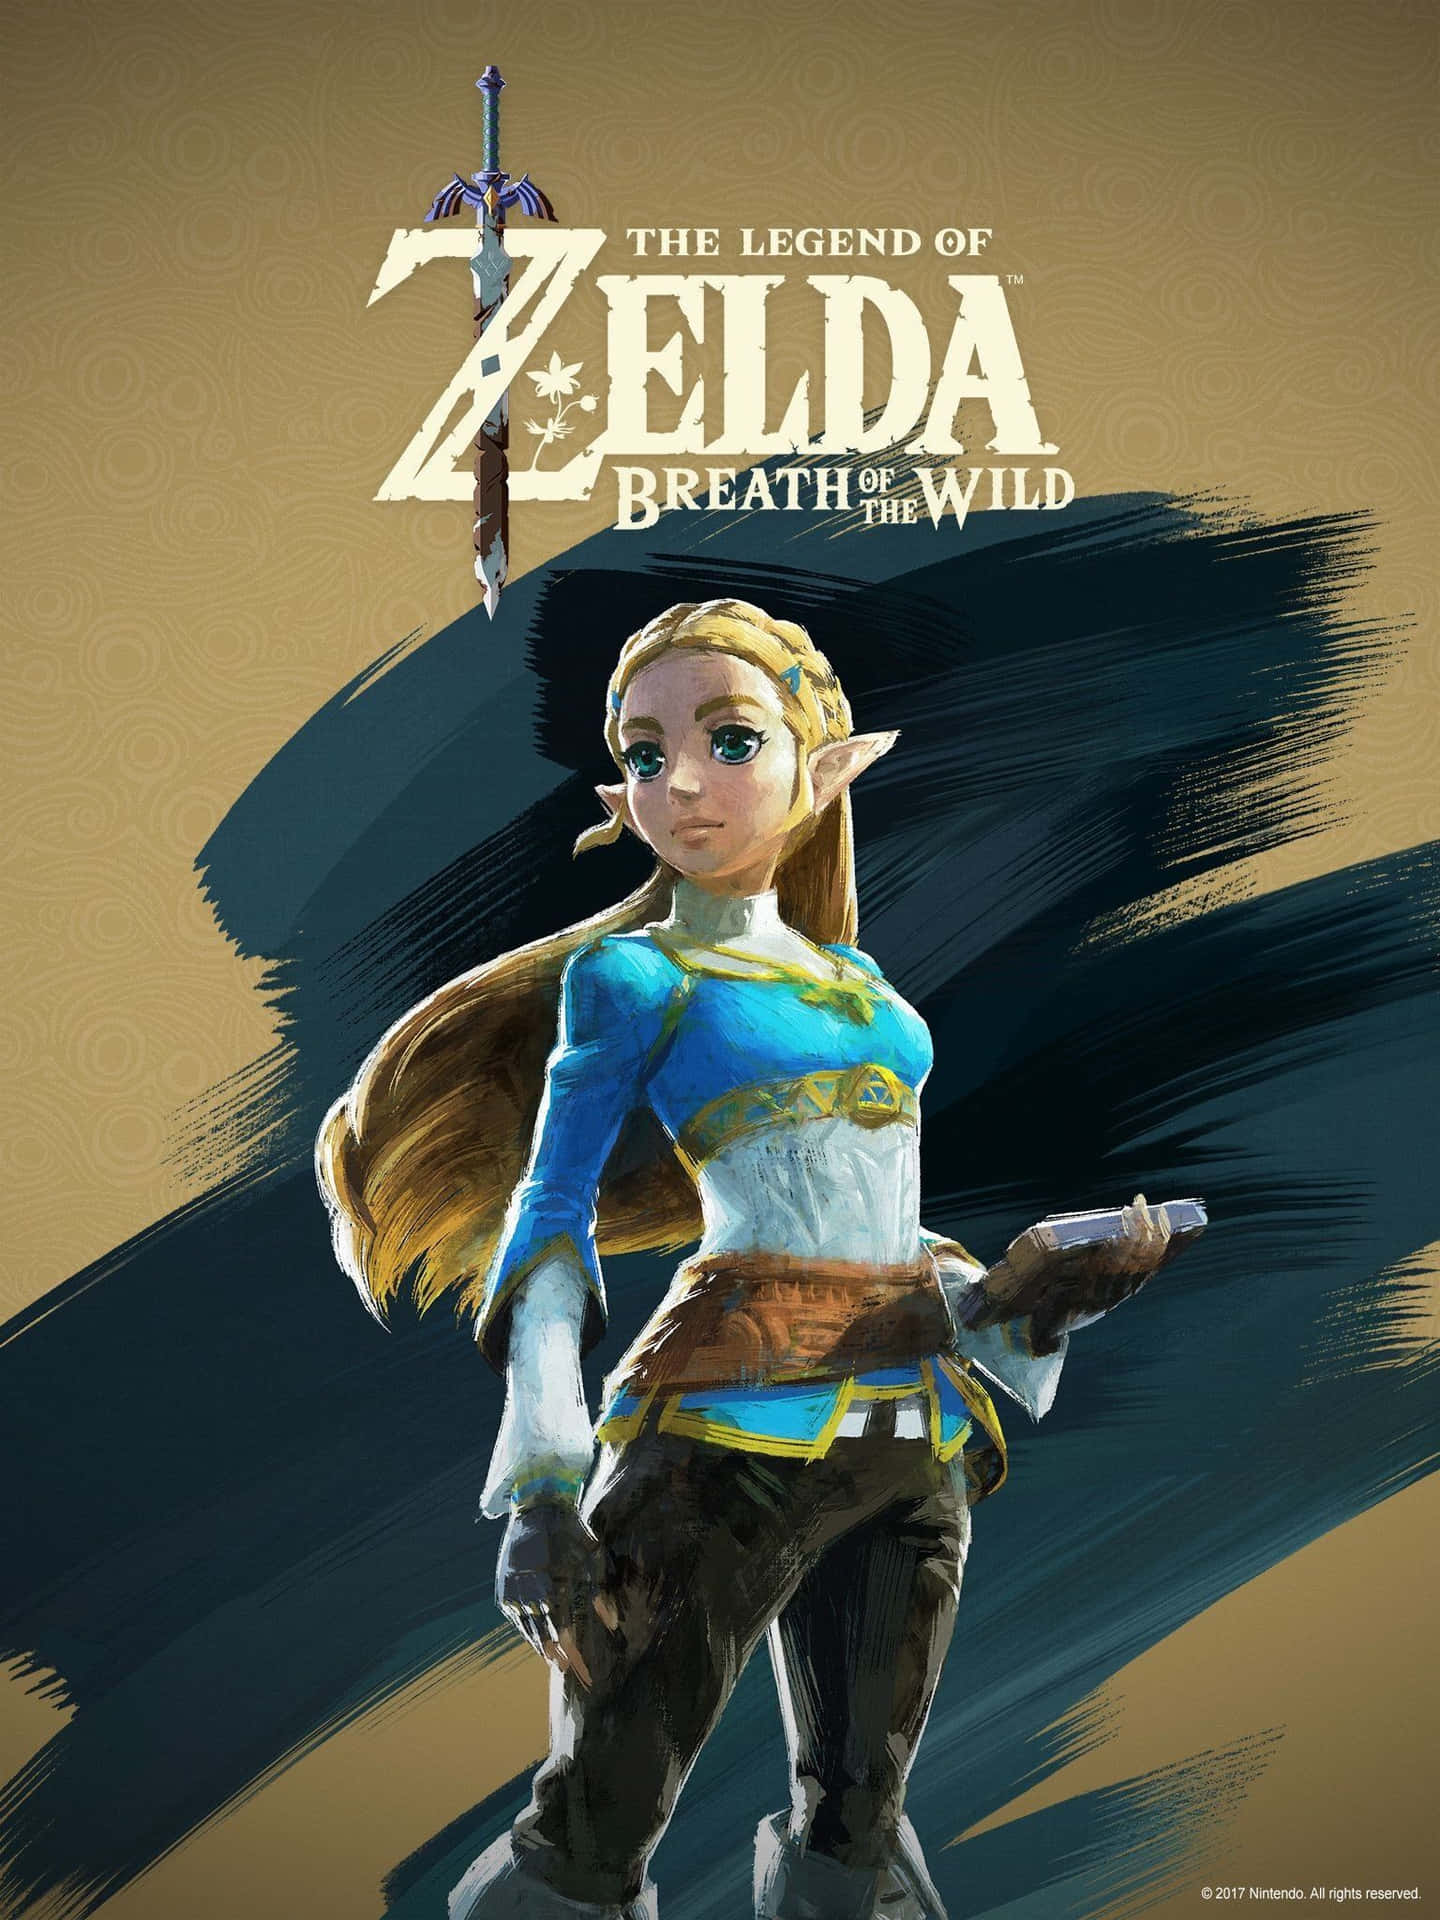 Take the adventure with you with The Legend of Zelda for iPhone Wallpaper